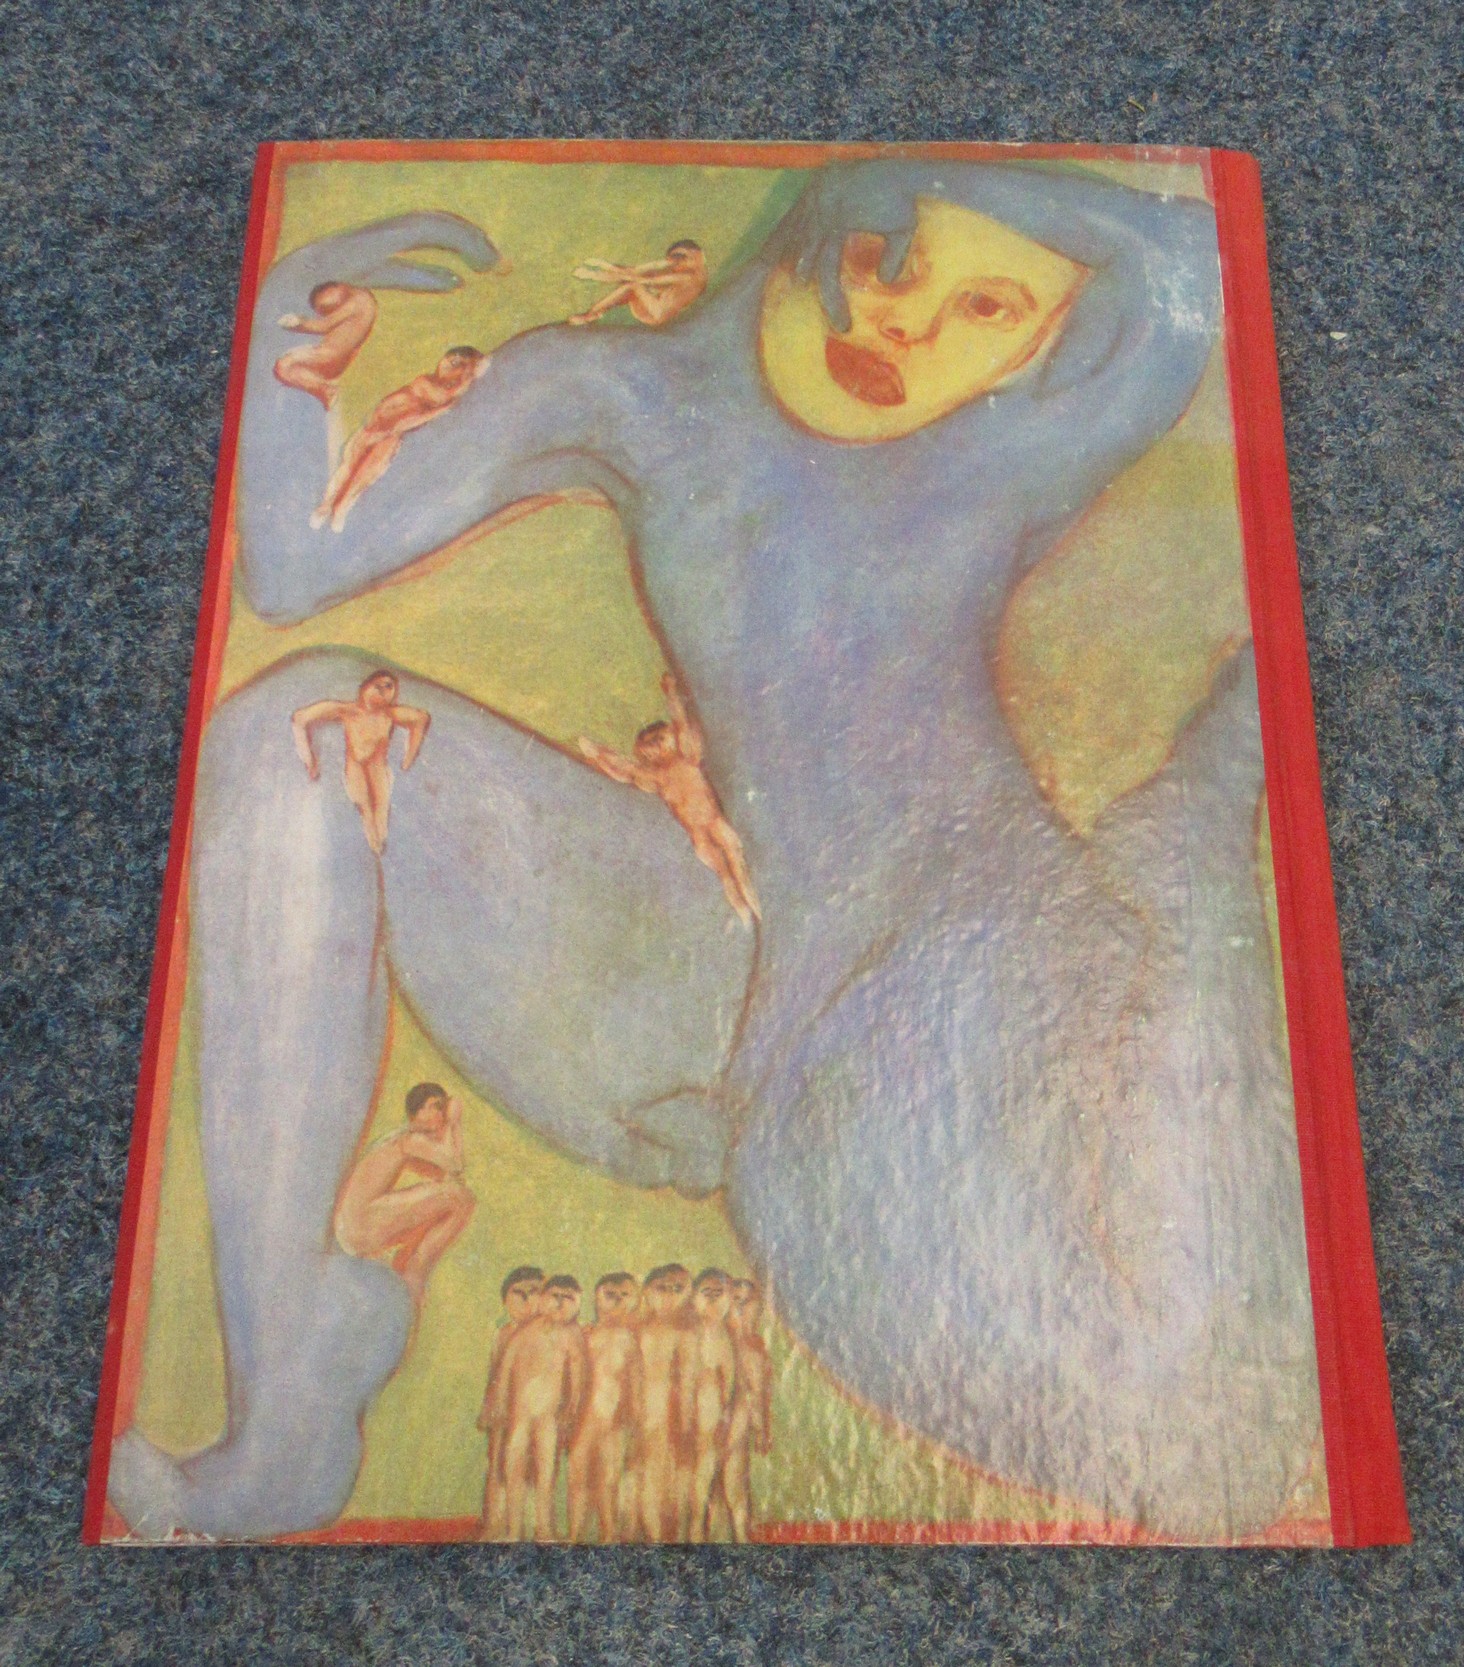 Francesco Clemente: Pinxit, Anthony d'offay, hard bound book, bound in India, colour illustrated